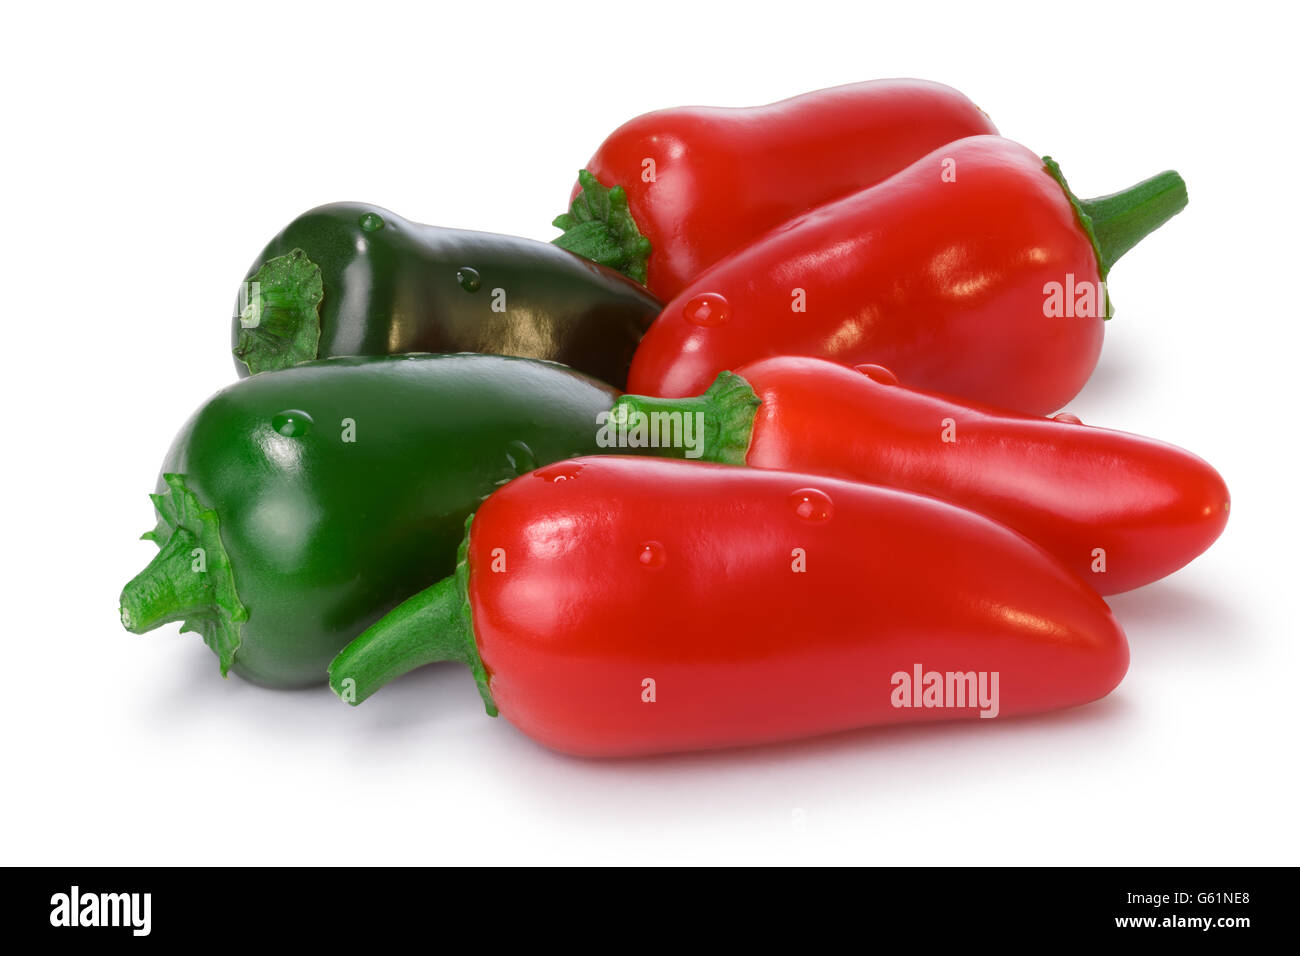 Pile of red and green Jalapeno Peppers. Clipping paths for both peppers and shadow, infinite depth of field Stock Photo